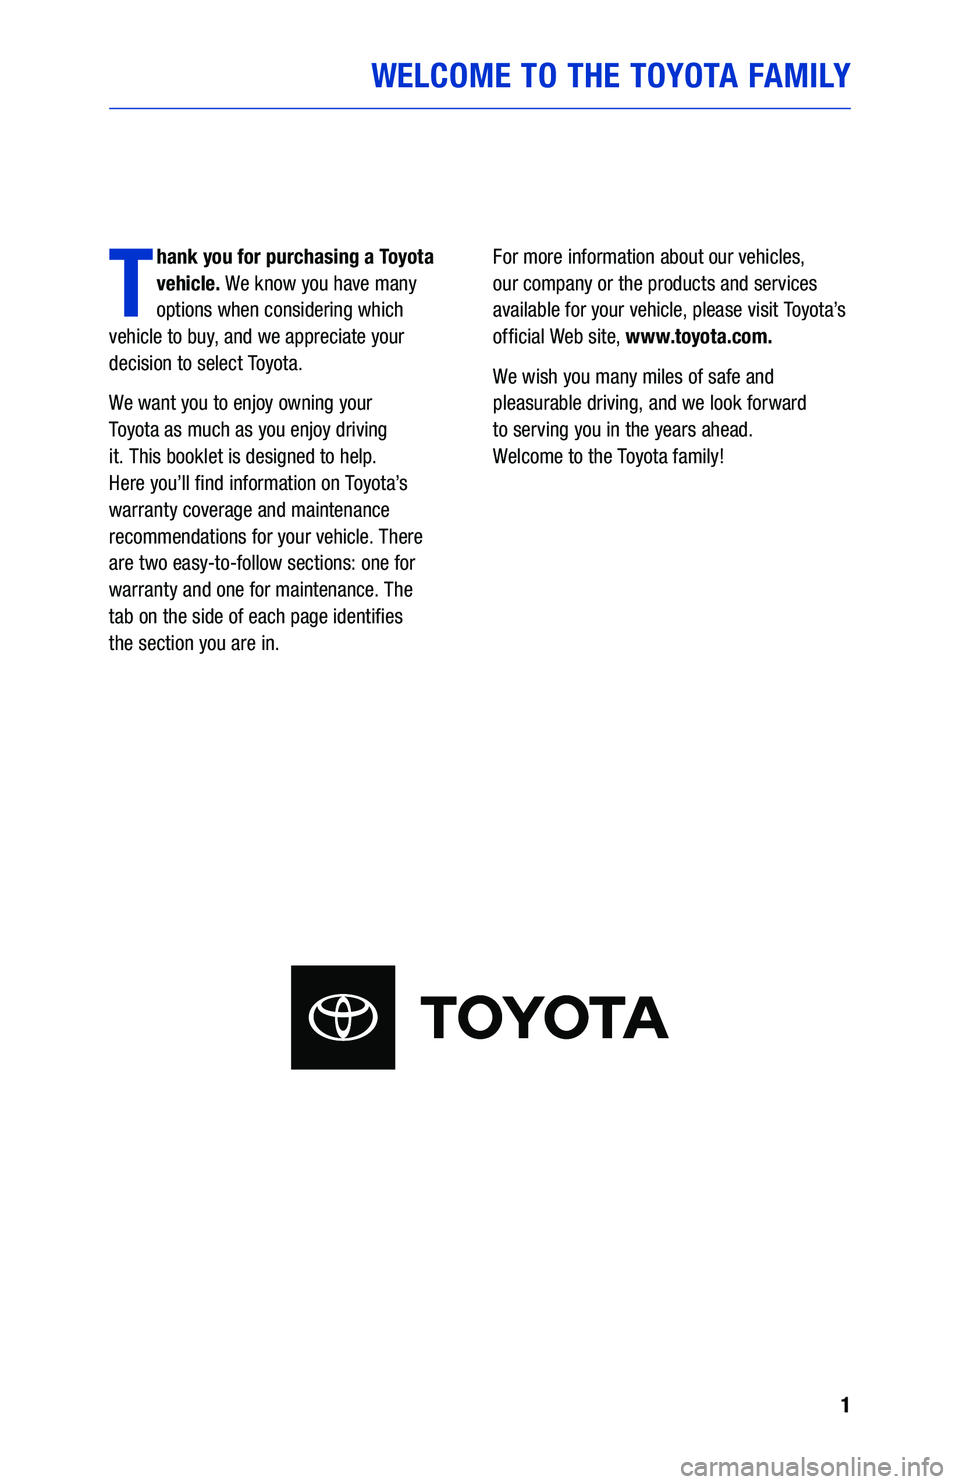 TOYOTA SEQUOIA 2020  Warranties & Maintenance Guides (in English) 1
WELCOME TO THE TOYOTA FAMILY
T
hank you for purchasing a Toyota 
vehicle. We know you have many 
options when considering which  
vehicle to buy, and we appreciate your 
decision to select Toyota.
W